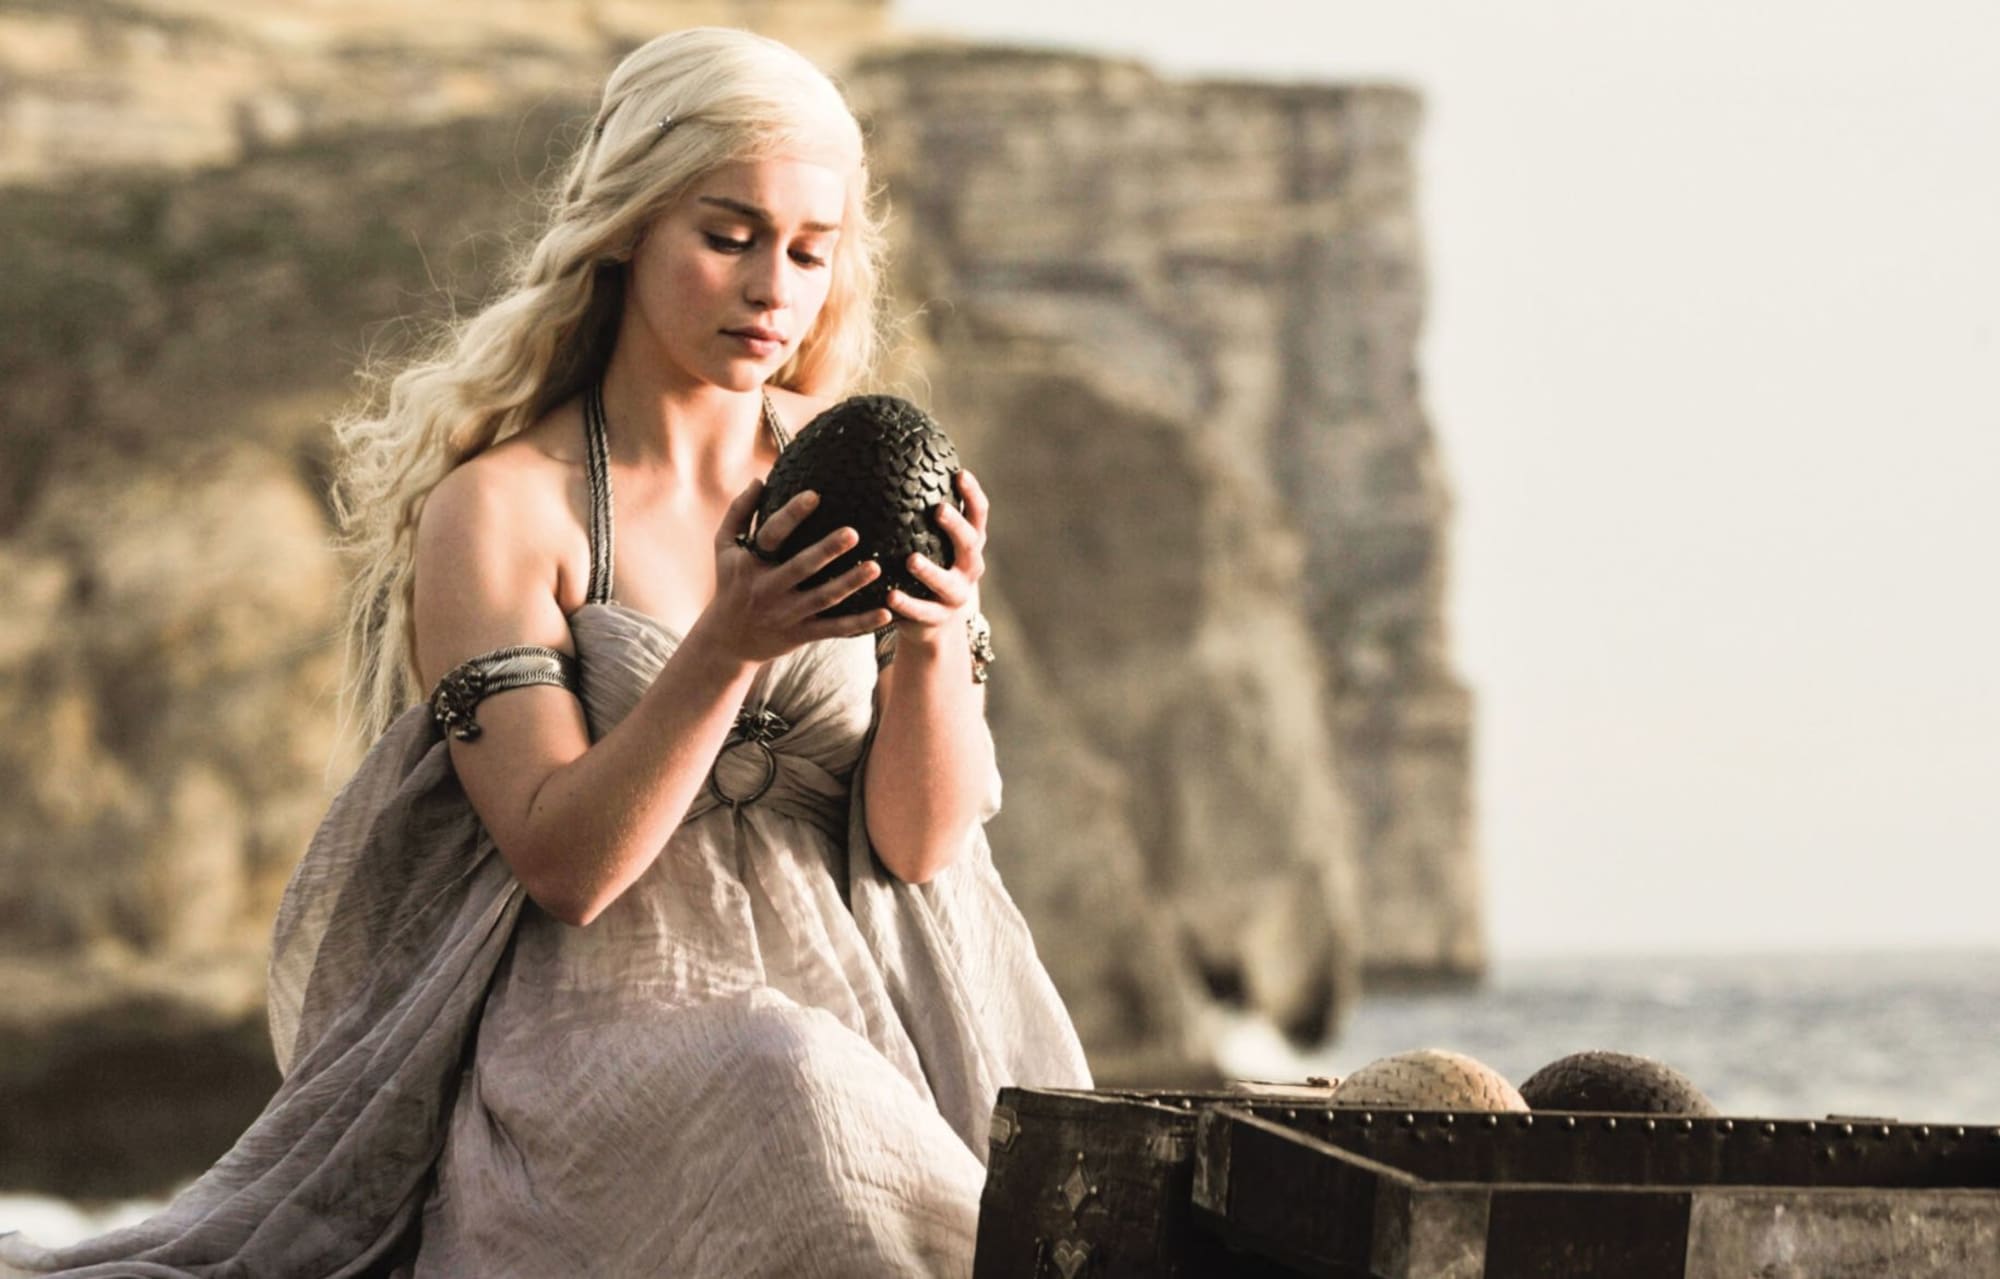 Emilia Clarke looks back on Game of Thrones season 1, forward to spin-offs